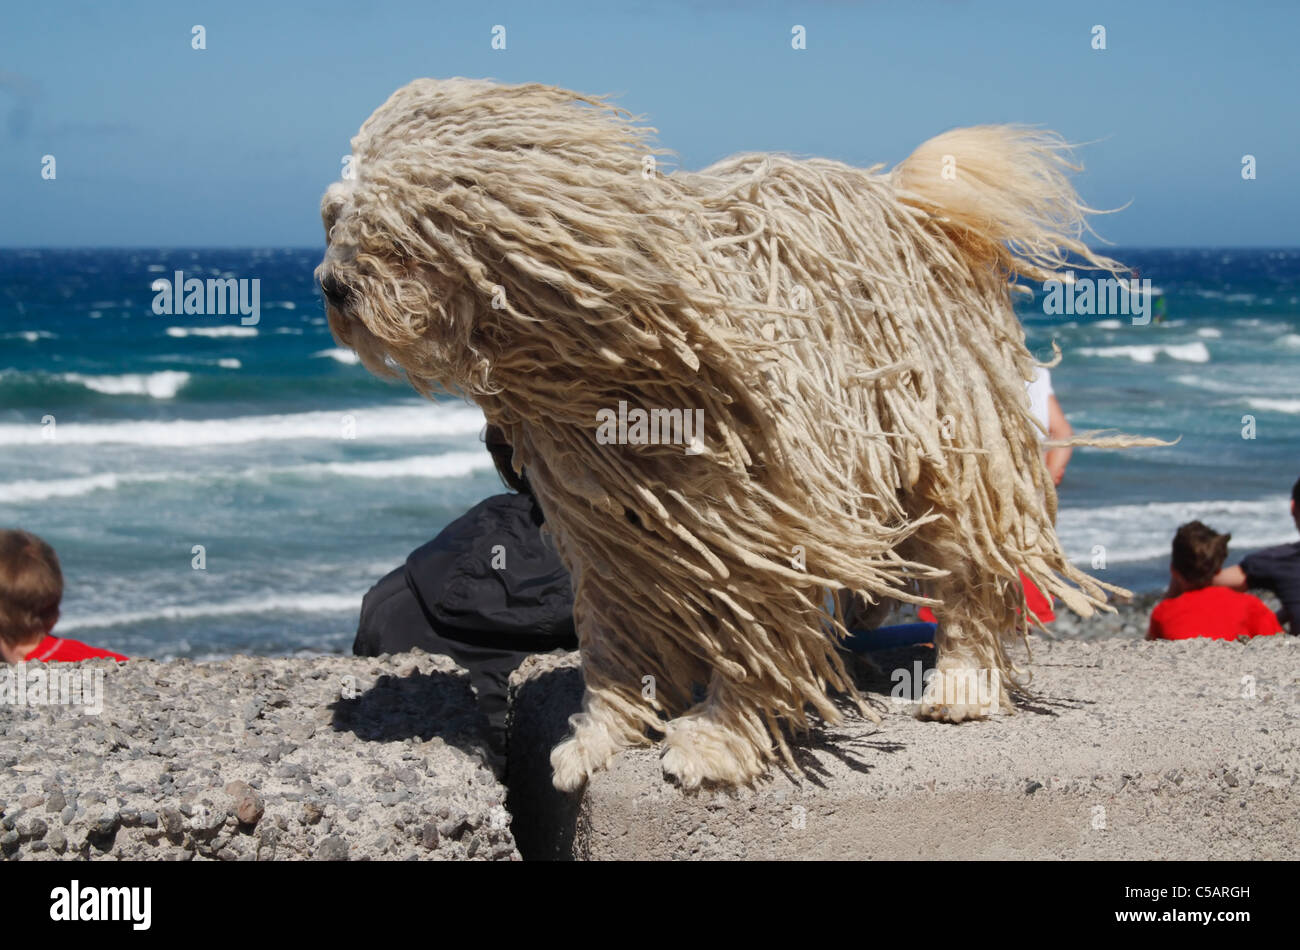 Puli breed of dog - also known as Hungarian Water dog - with it's unique Dreadlock-lile corded coat on windy day at the coast Stock Photo